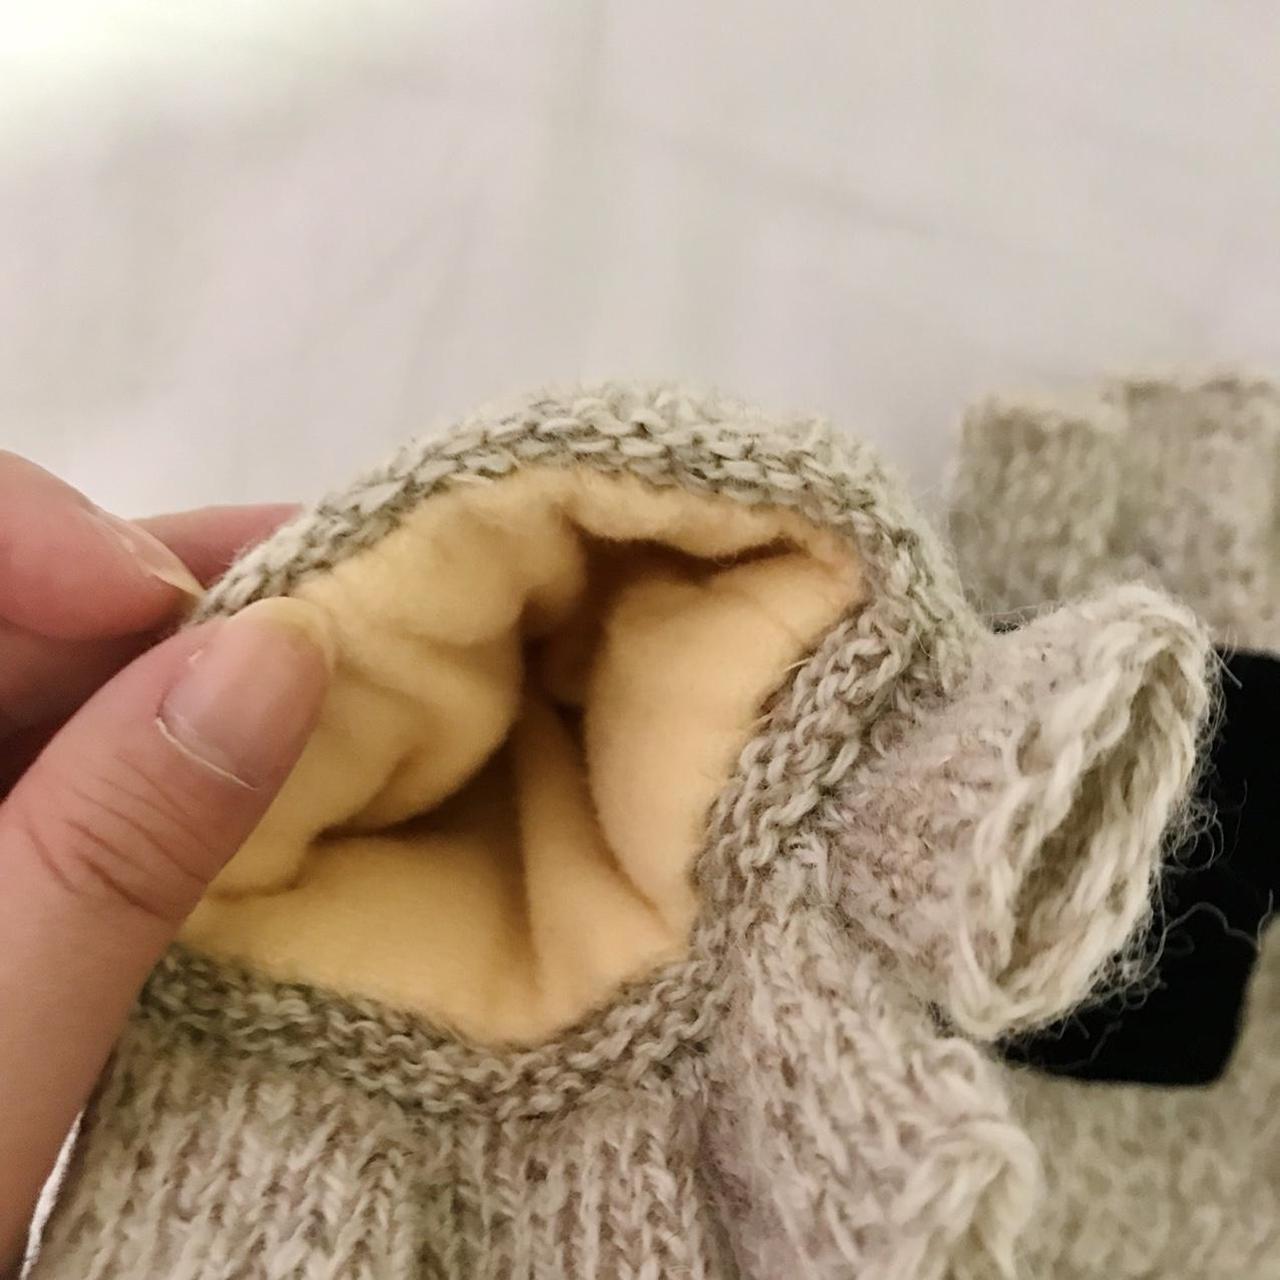 Product Image 3 - Beige winter mittens/gloves
You can wear